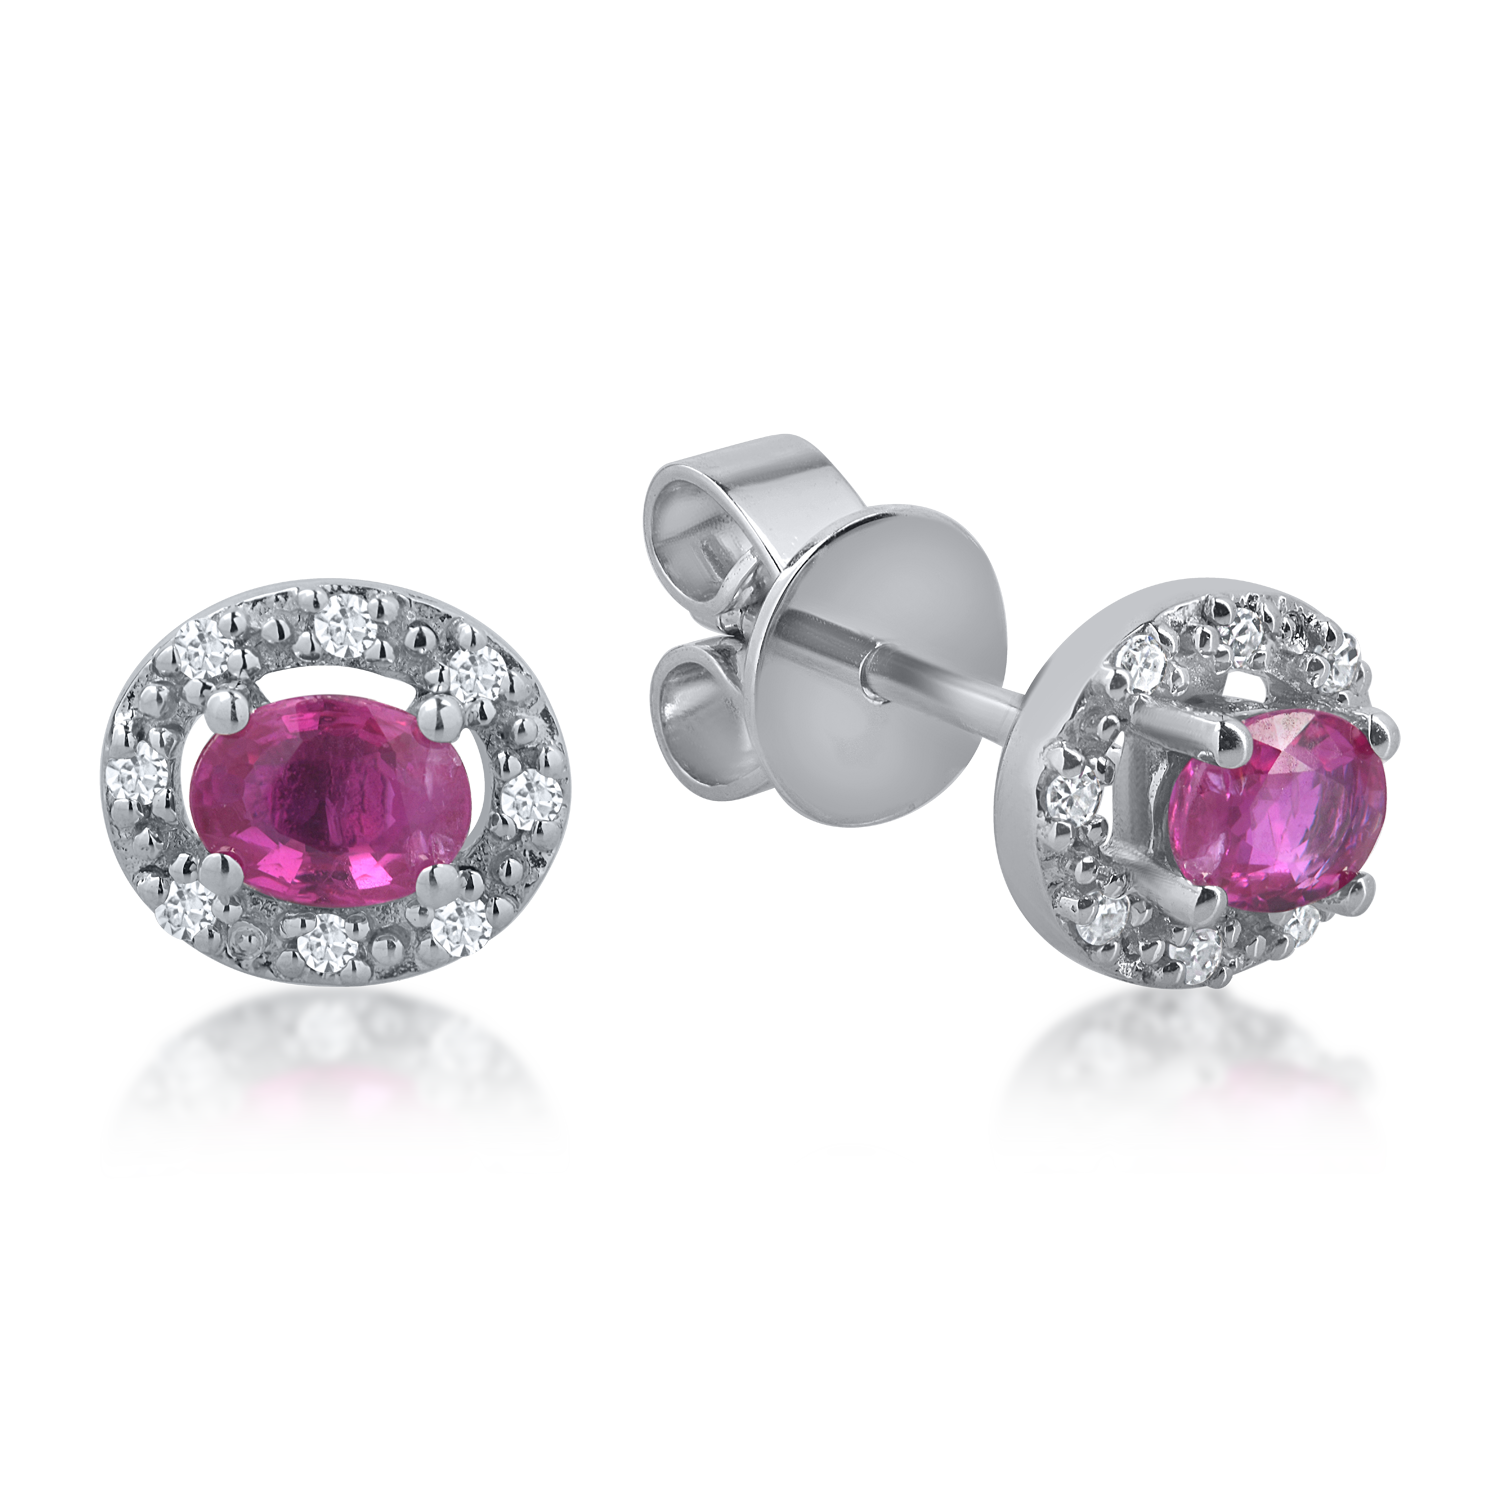 White gold earrings with 0.49ct rubies and 0.07ct diamonds